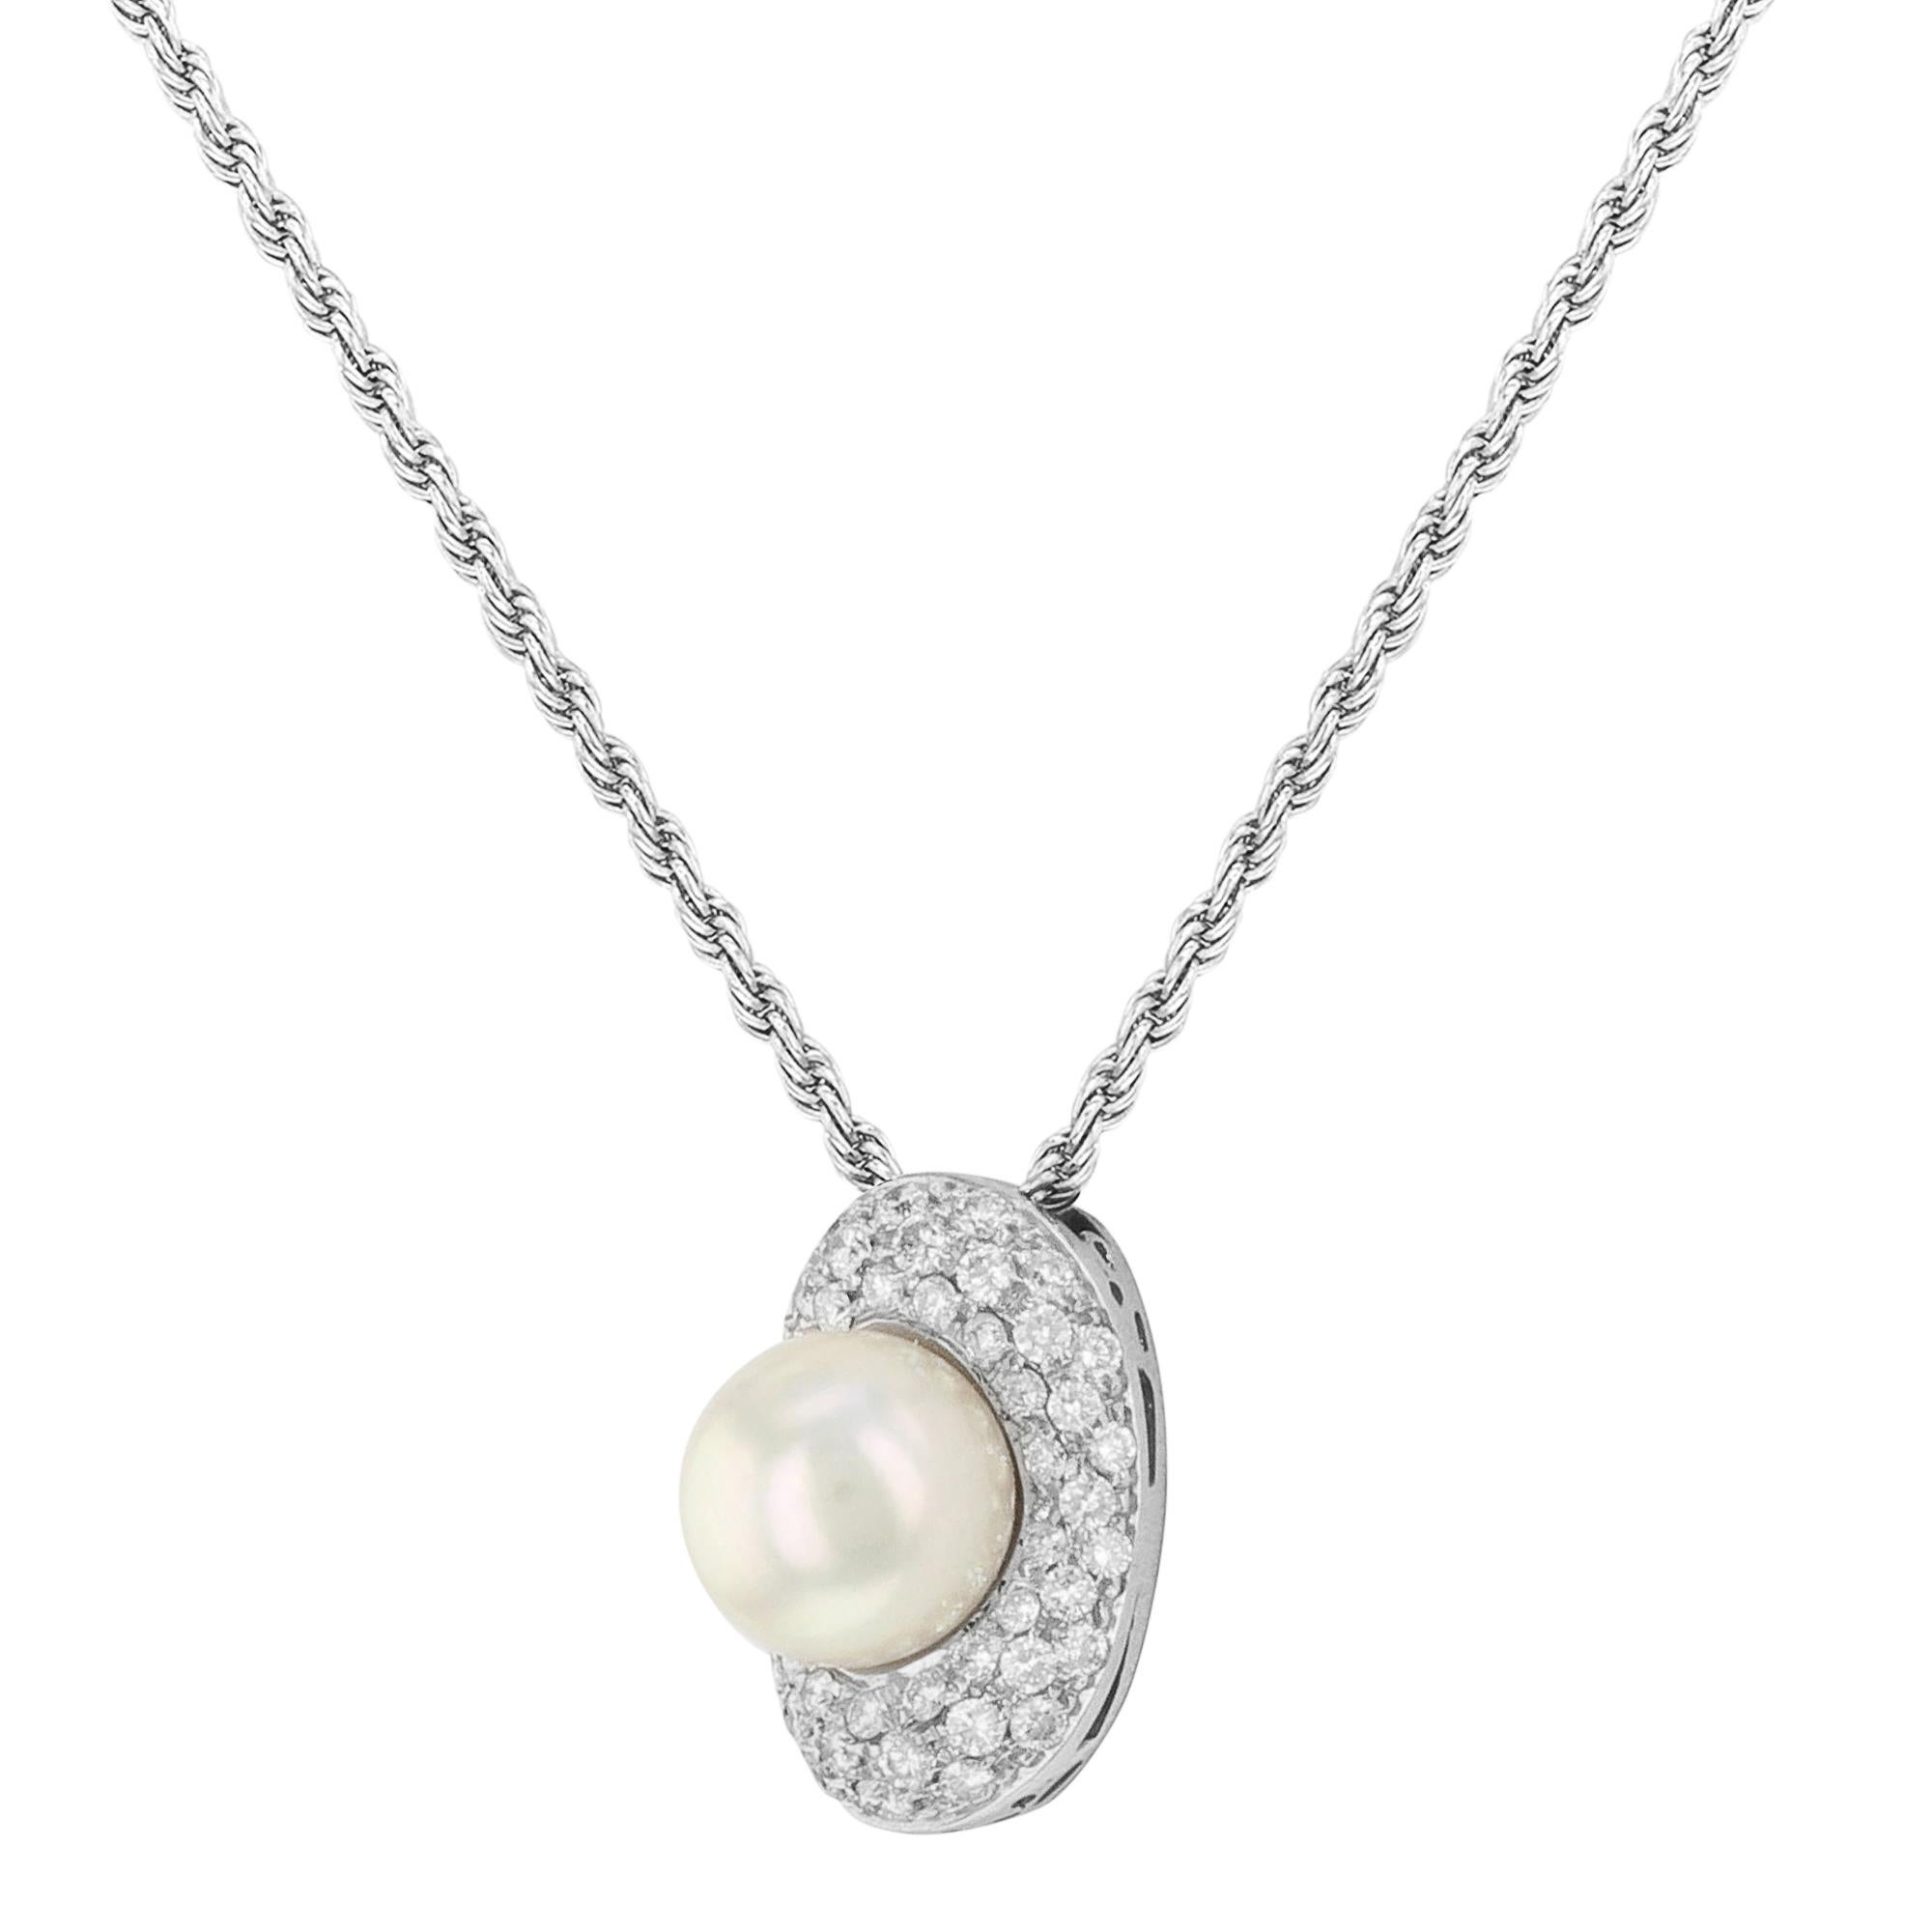 Salvini Diamonds & Pearl Ladies Pendant Necklace 18k White Gold 0.65cttw In New Condition For Sale In New York, NY